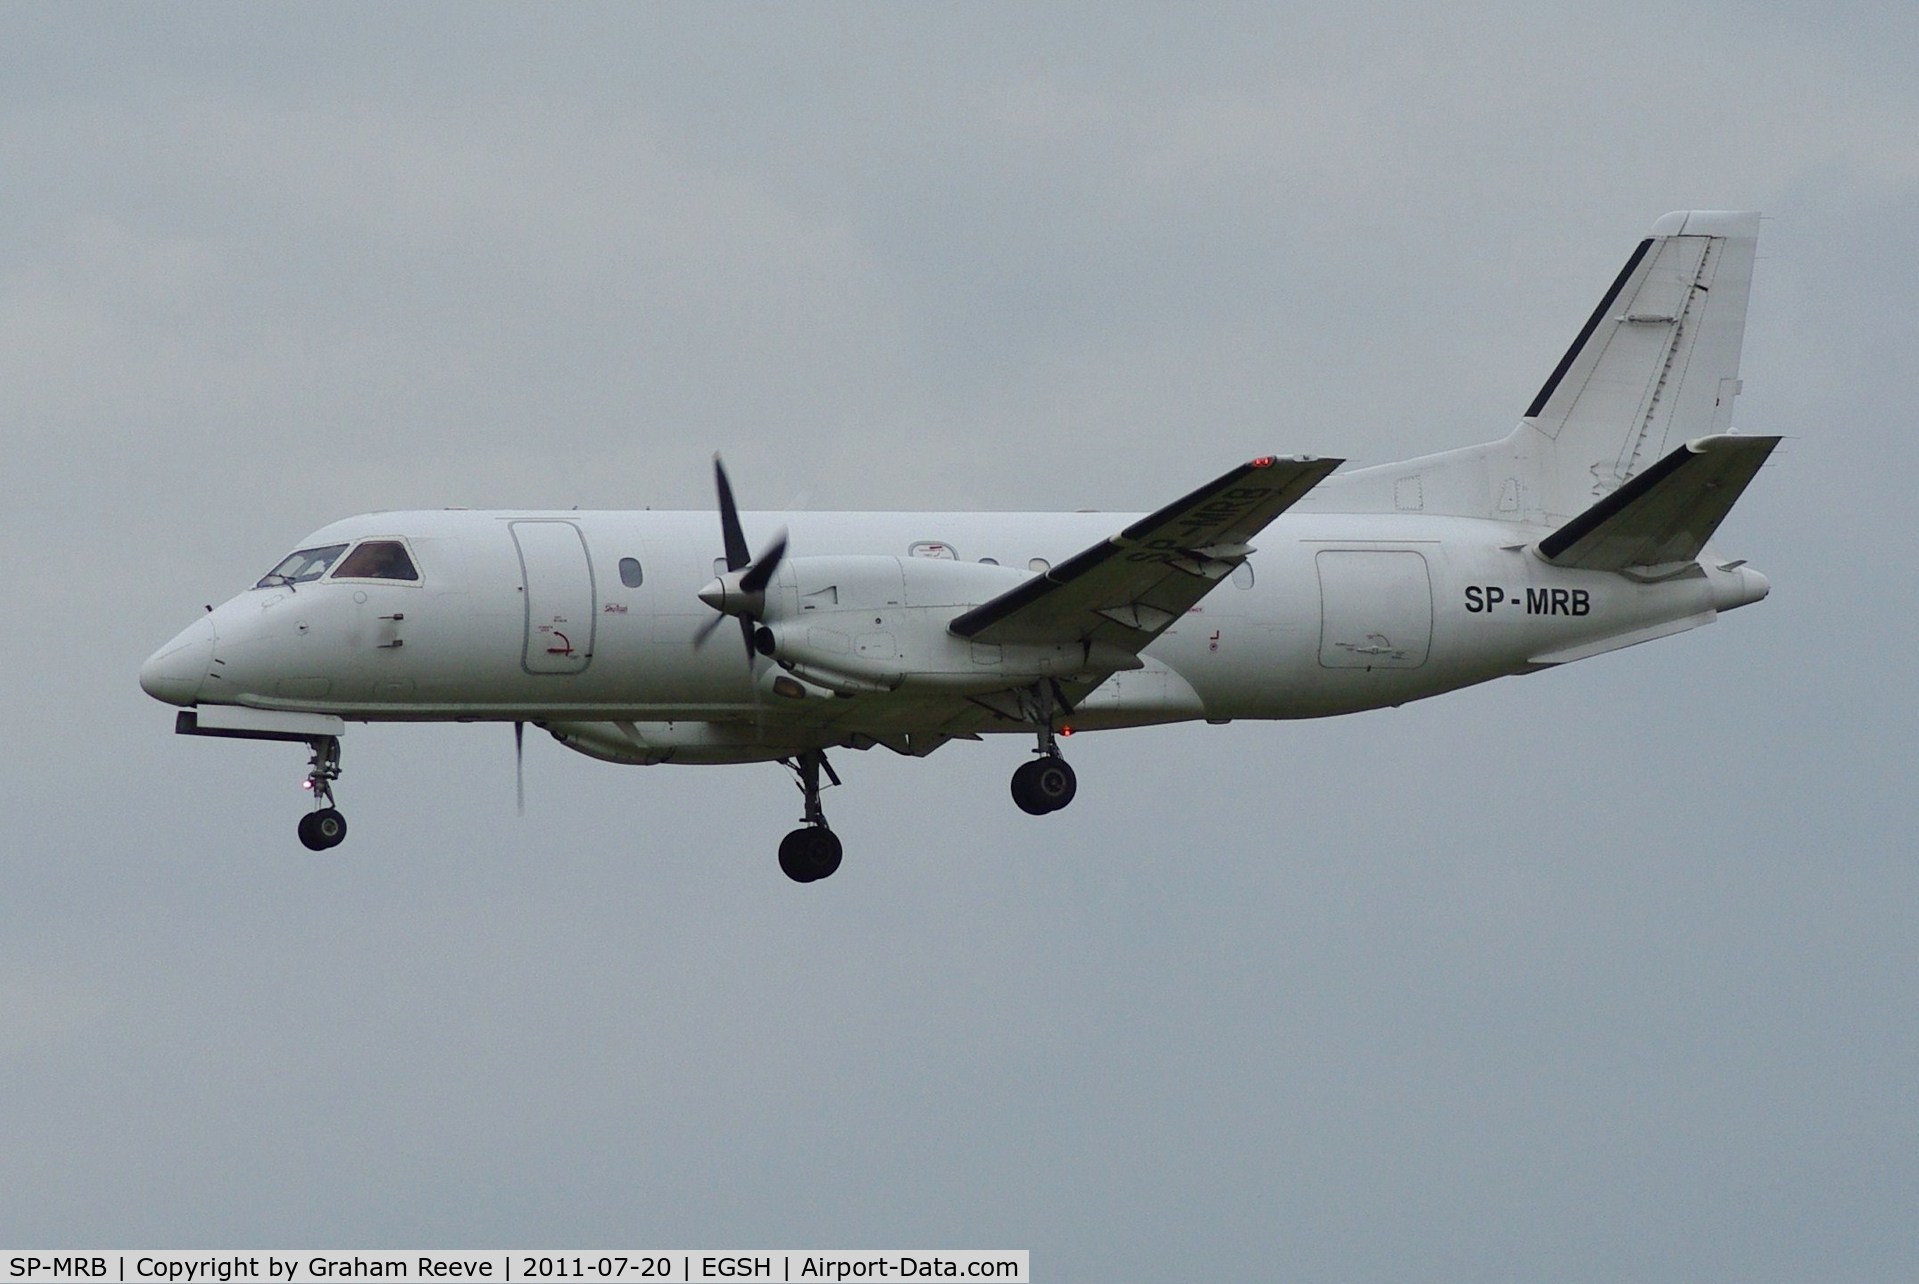 SP-MRB, 1987 Saab SF340A C/N 340A-100, About to land.